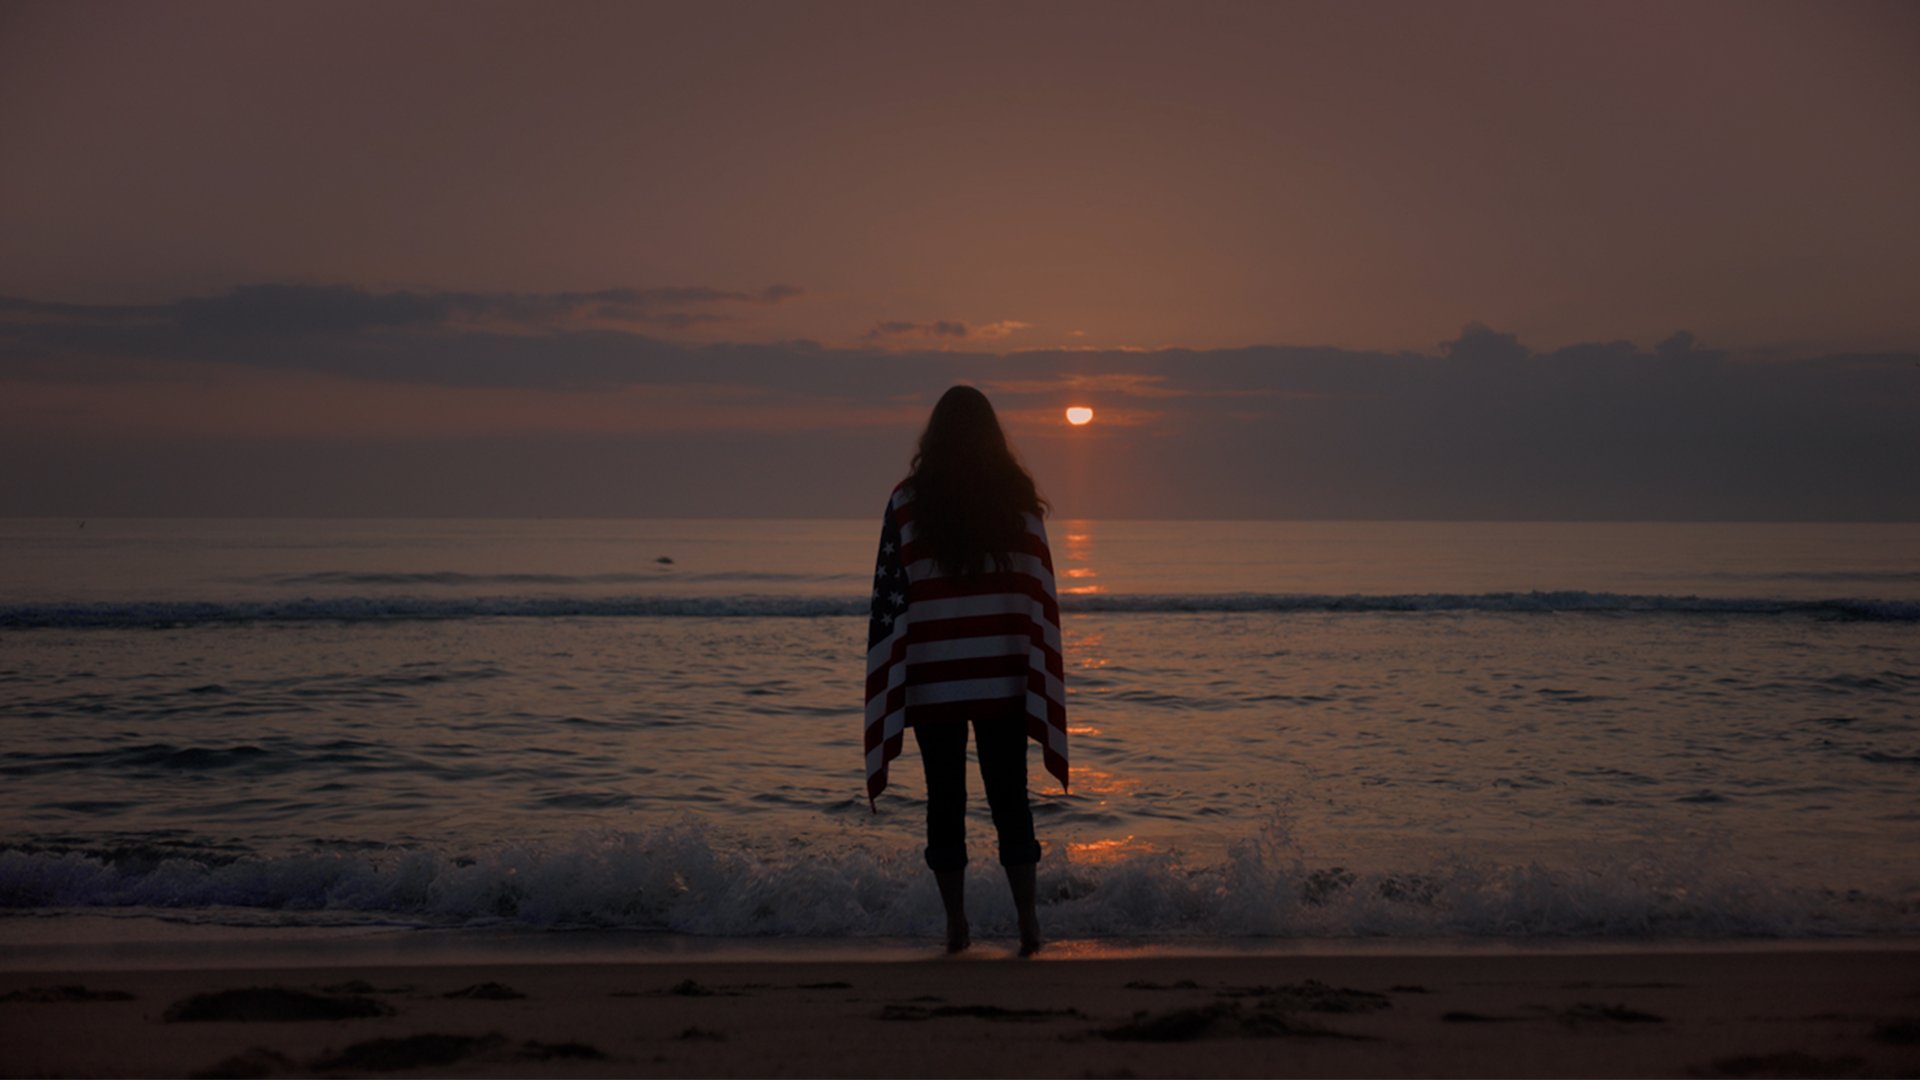 A woman looks out over the horizon at a sunset, a U.S.A. flag draped over her shoulders.